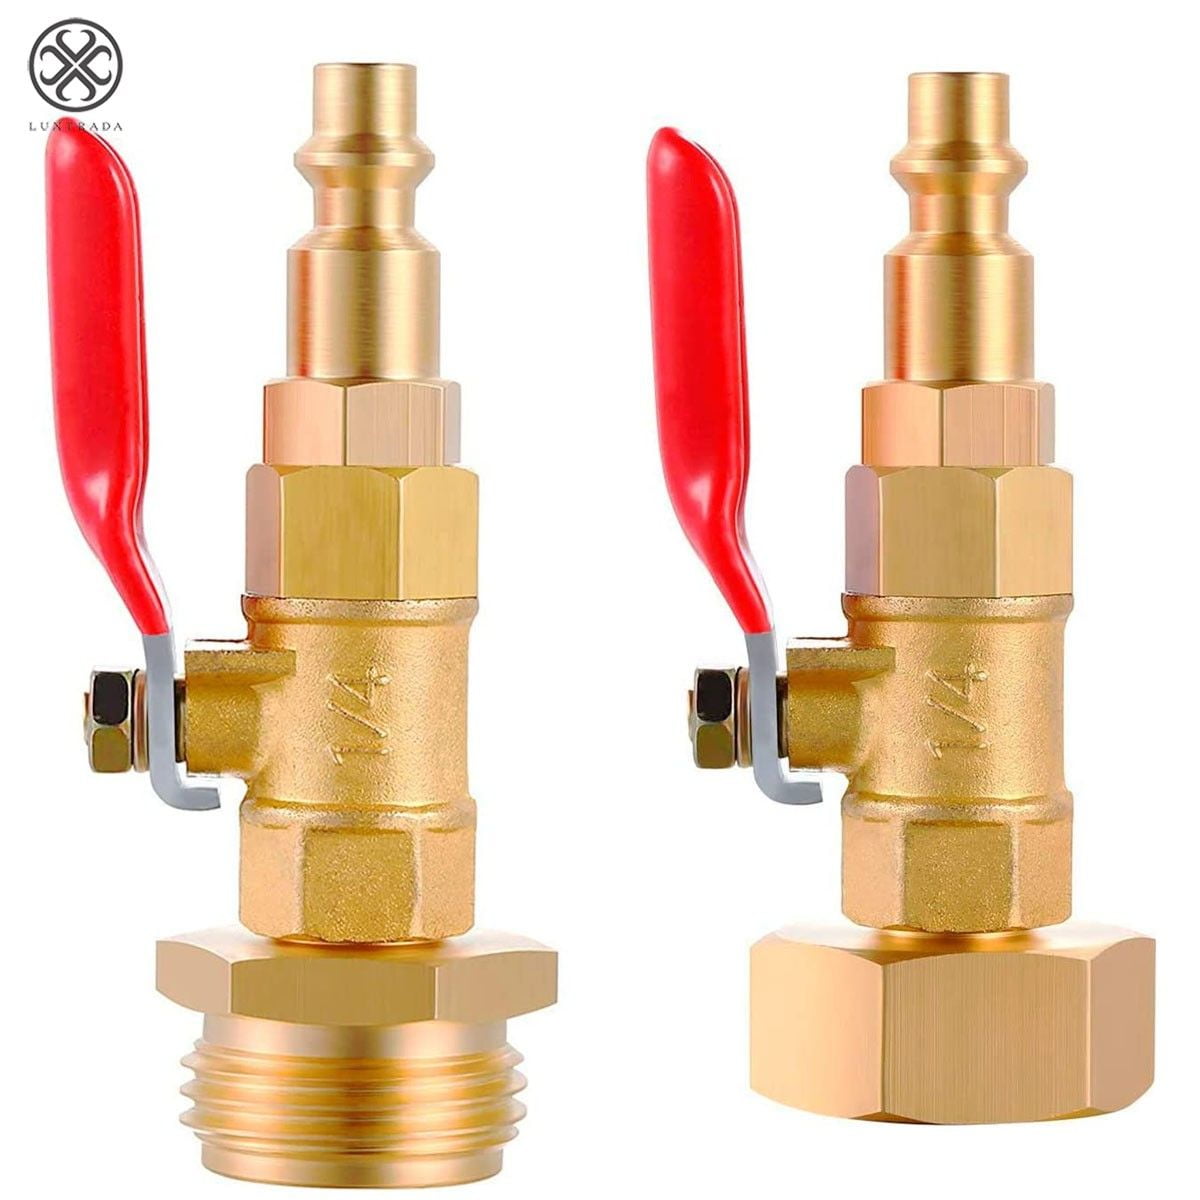 RV Winterize Blowout Adapter，1/4 in Male Quick Connecting Plug Brass Made Winterizing Quick Fitting with Ball Valve Easy Blow Out Water Adapter for RV Boat Camper Garden Water Lines 